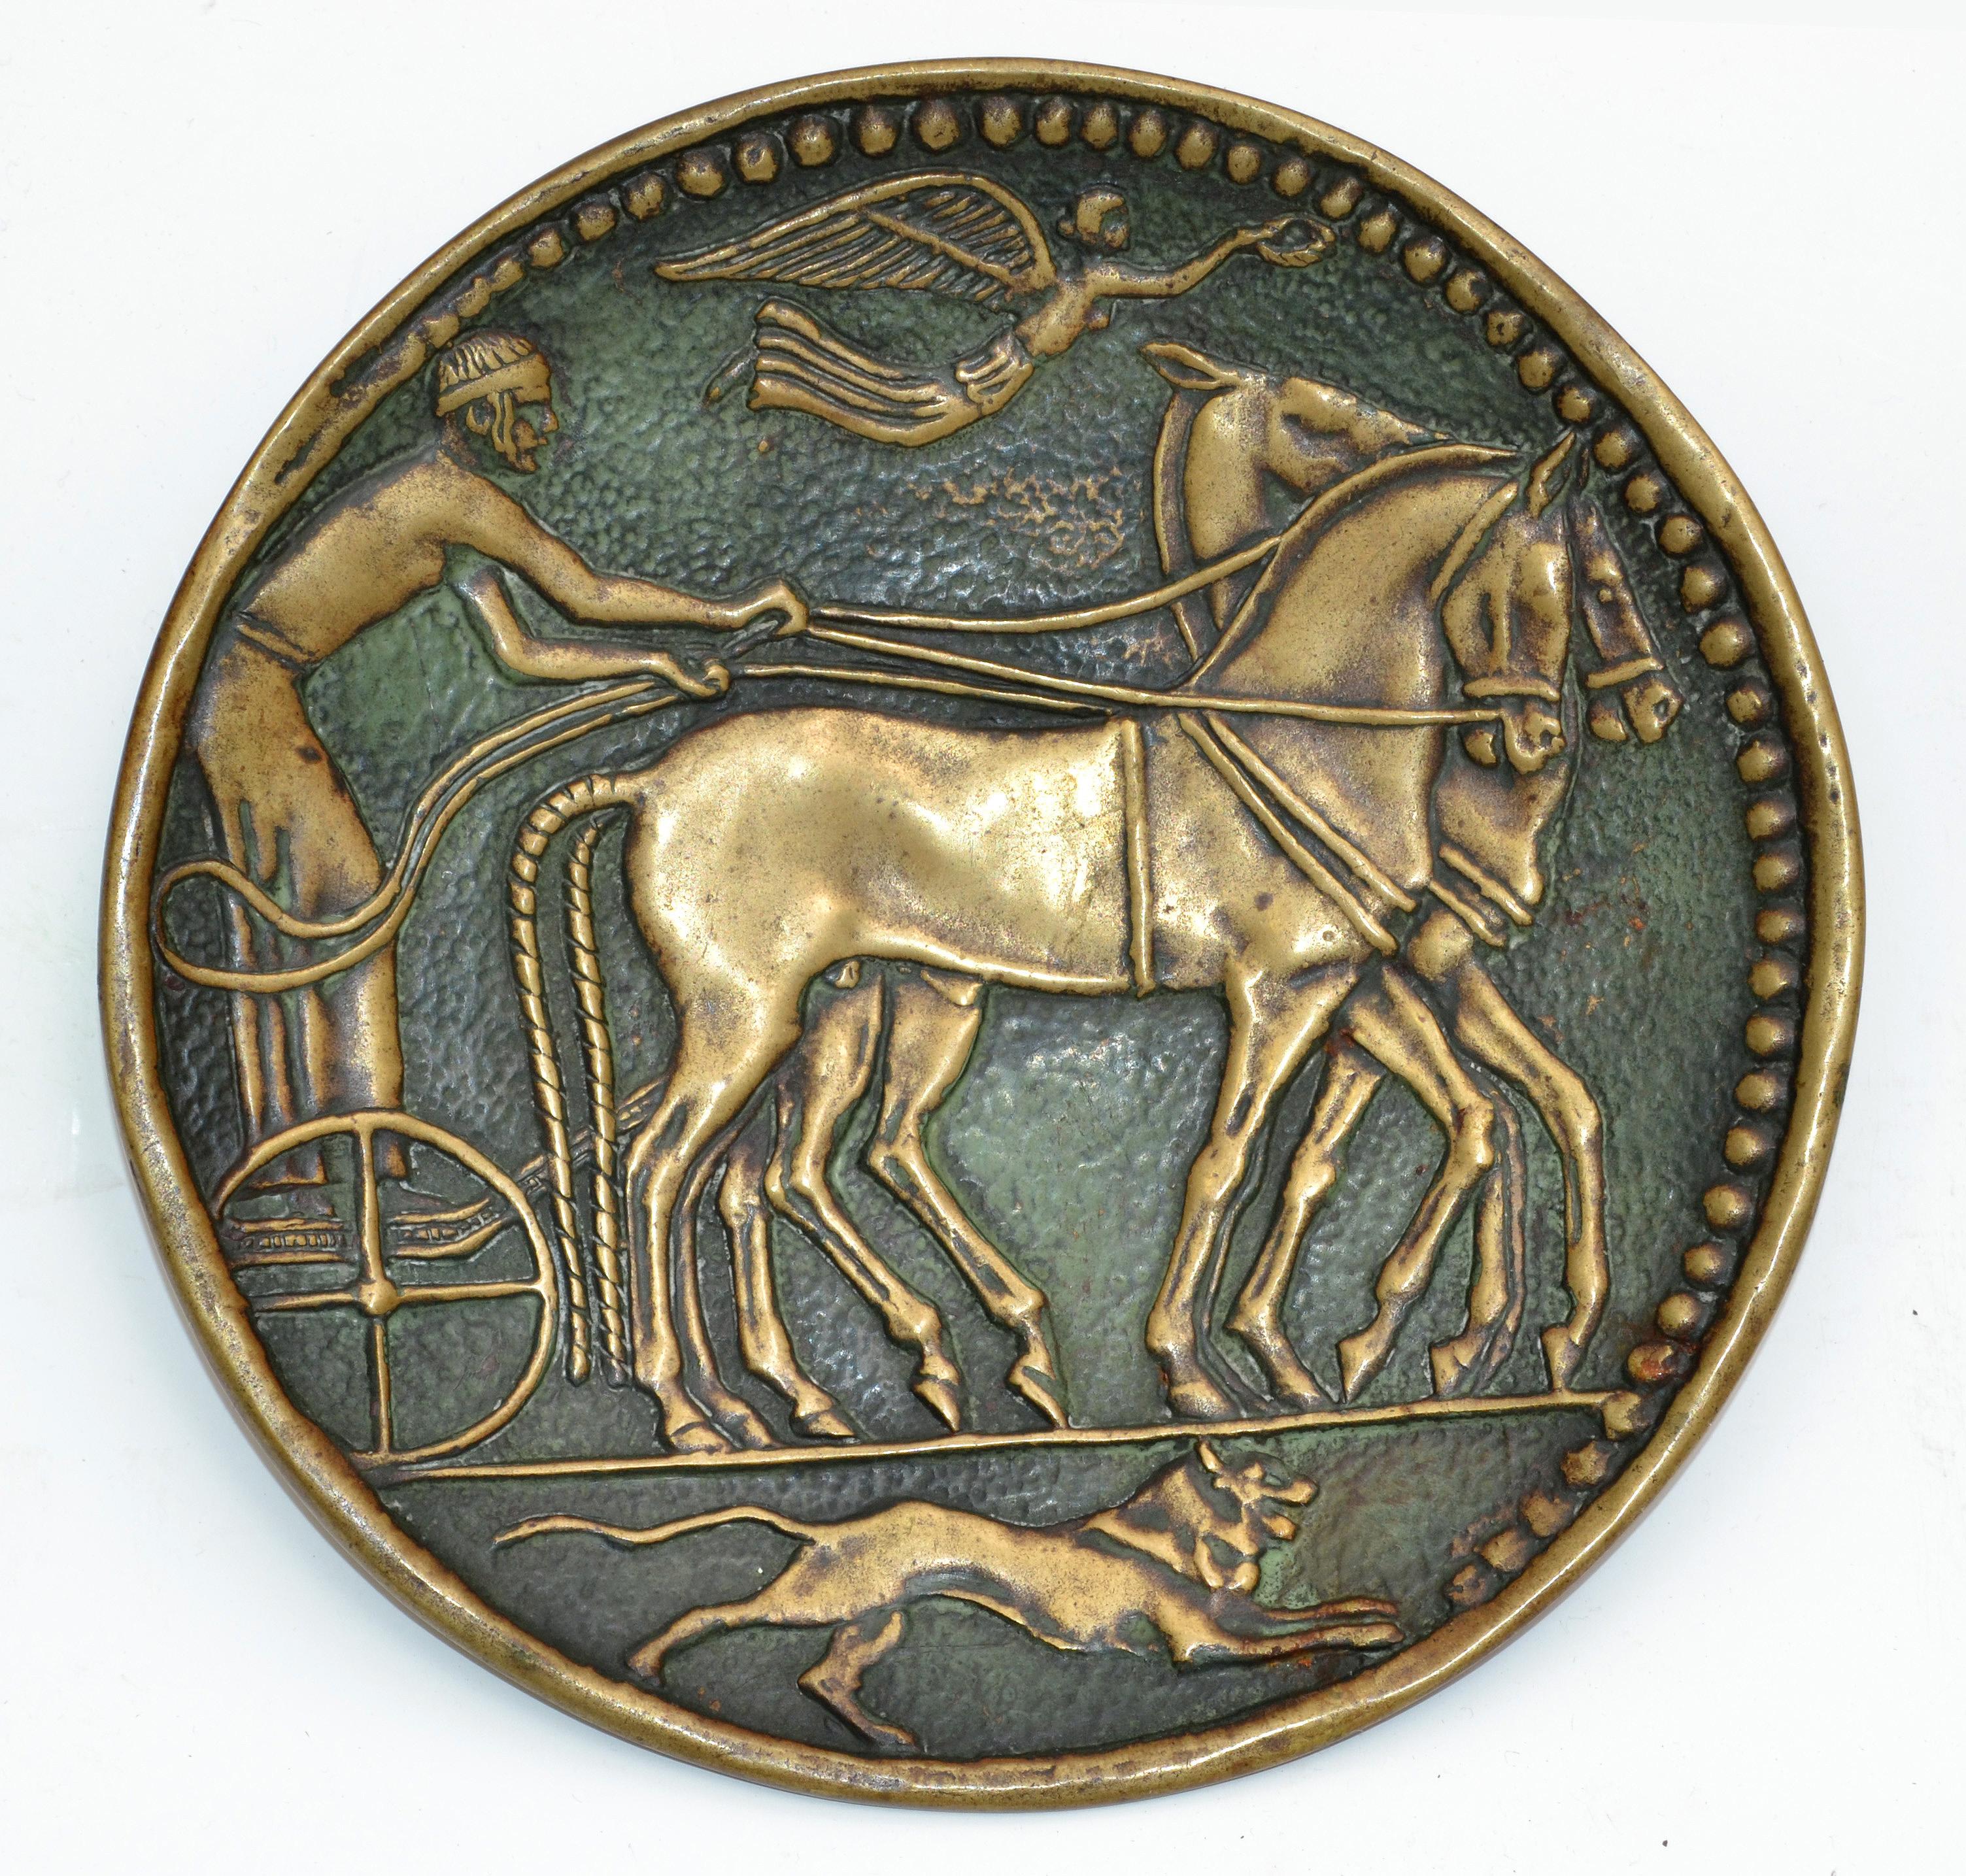 Beautiful solid Bronze double patina low relief décor catchall, footed bowl or videpoche.
Stamped Bronze on the reverse and Artist Mark, M. Le Verrier.
A French Art Deco Collector's piece made with superb craftmanship.